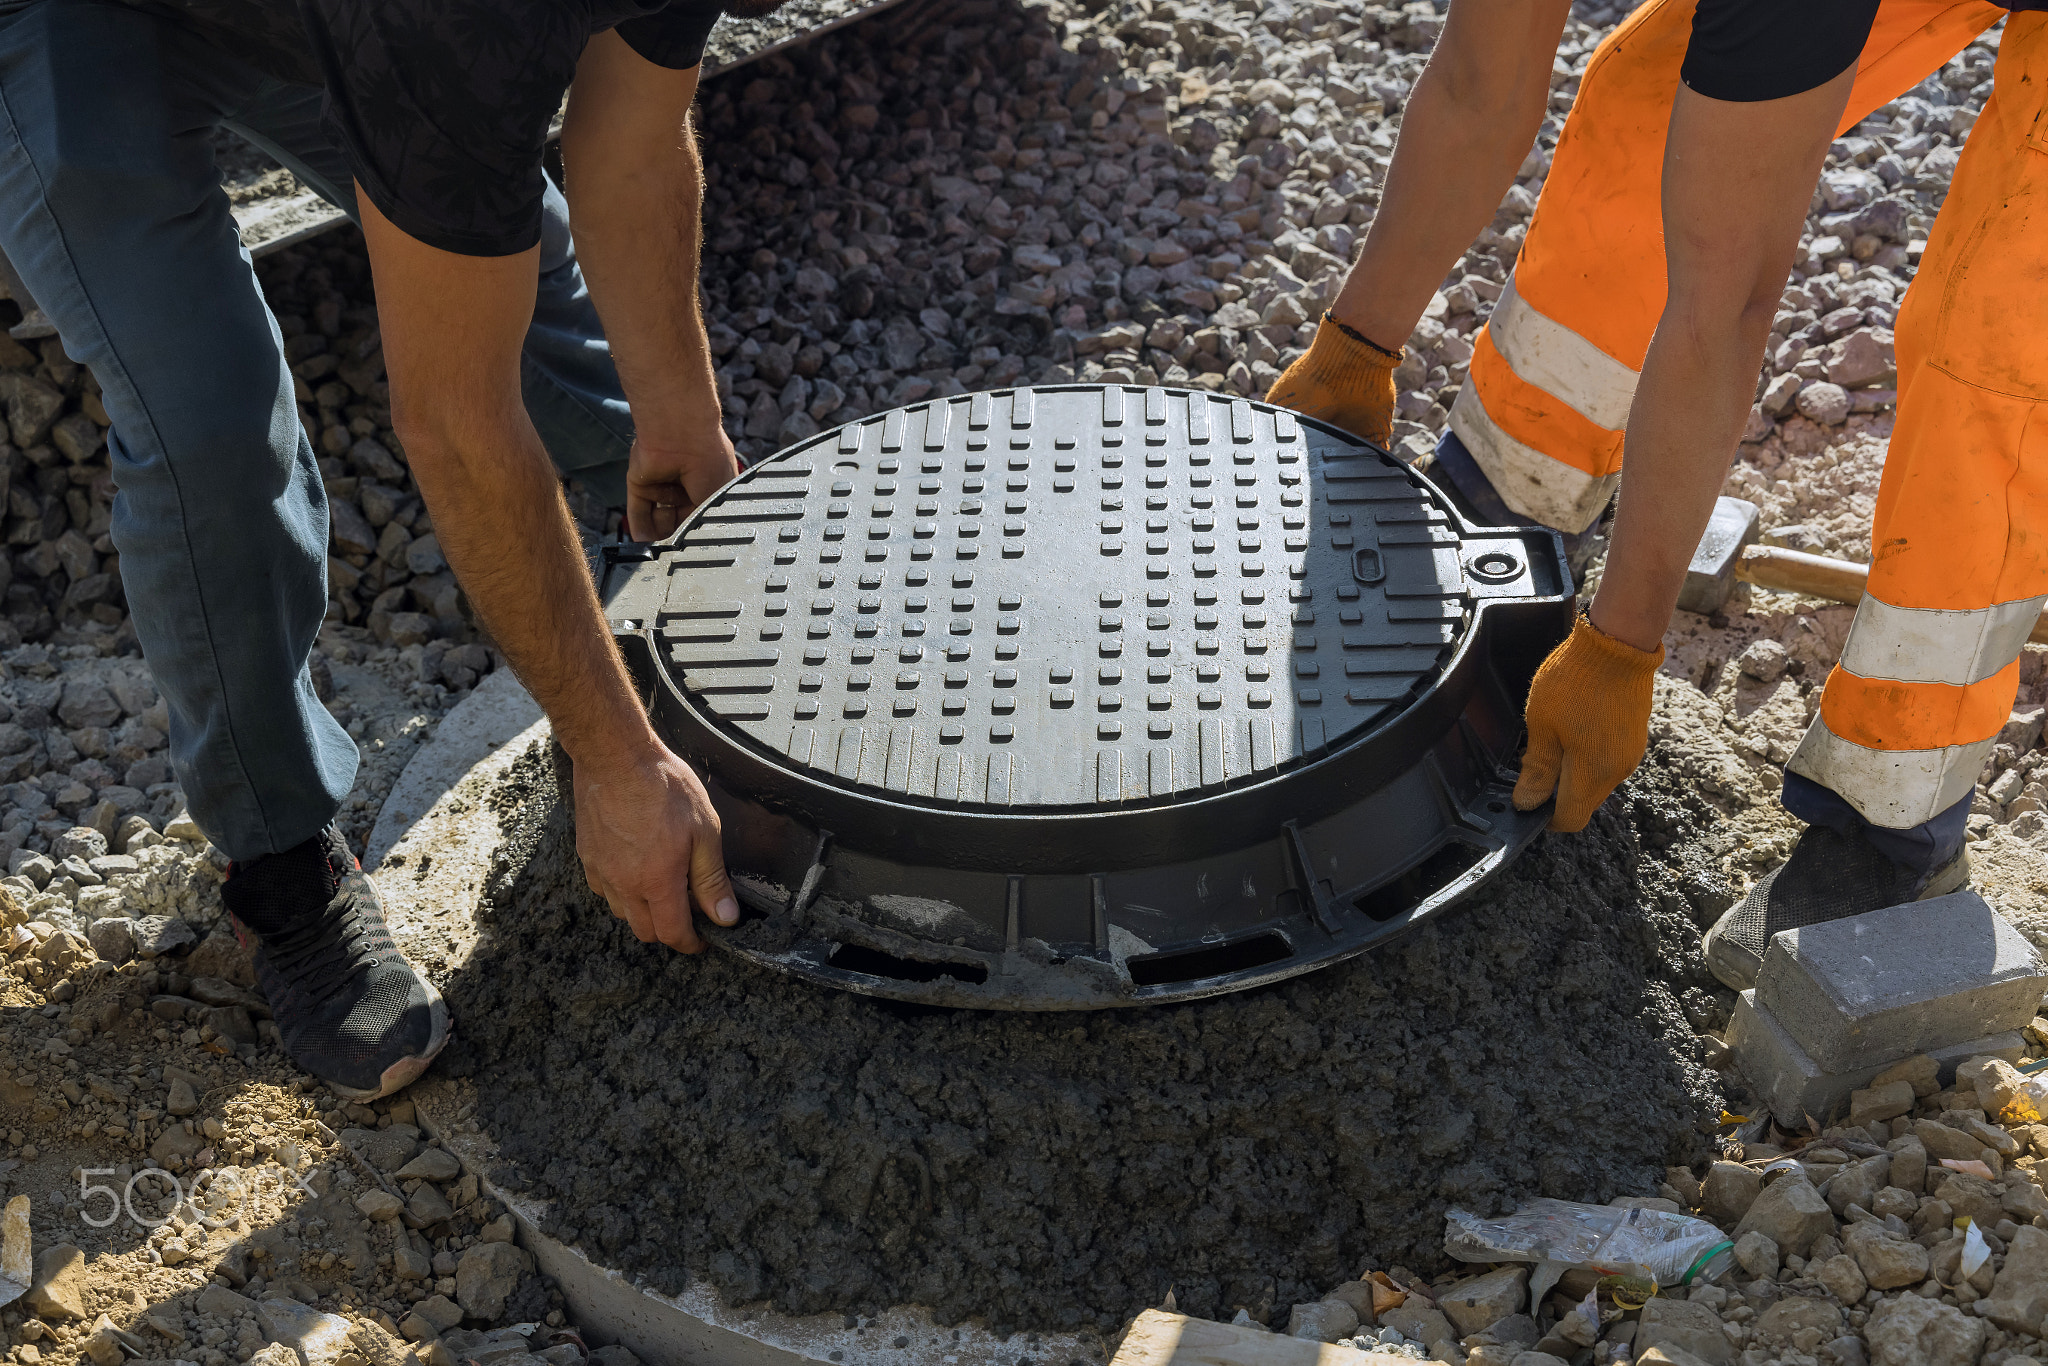 A worker installs a sewer manhole on a septic tank made of concrete